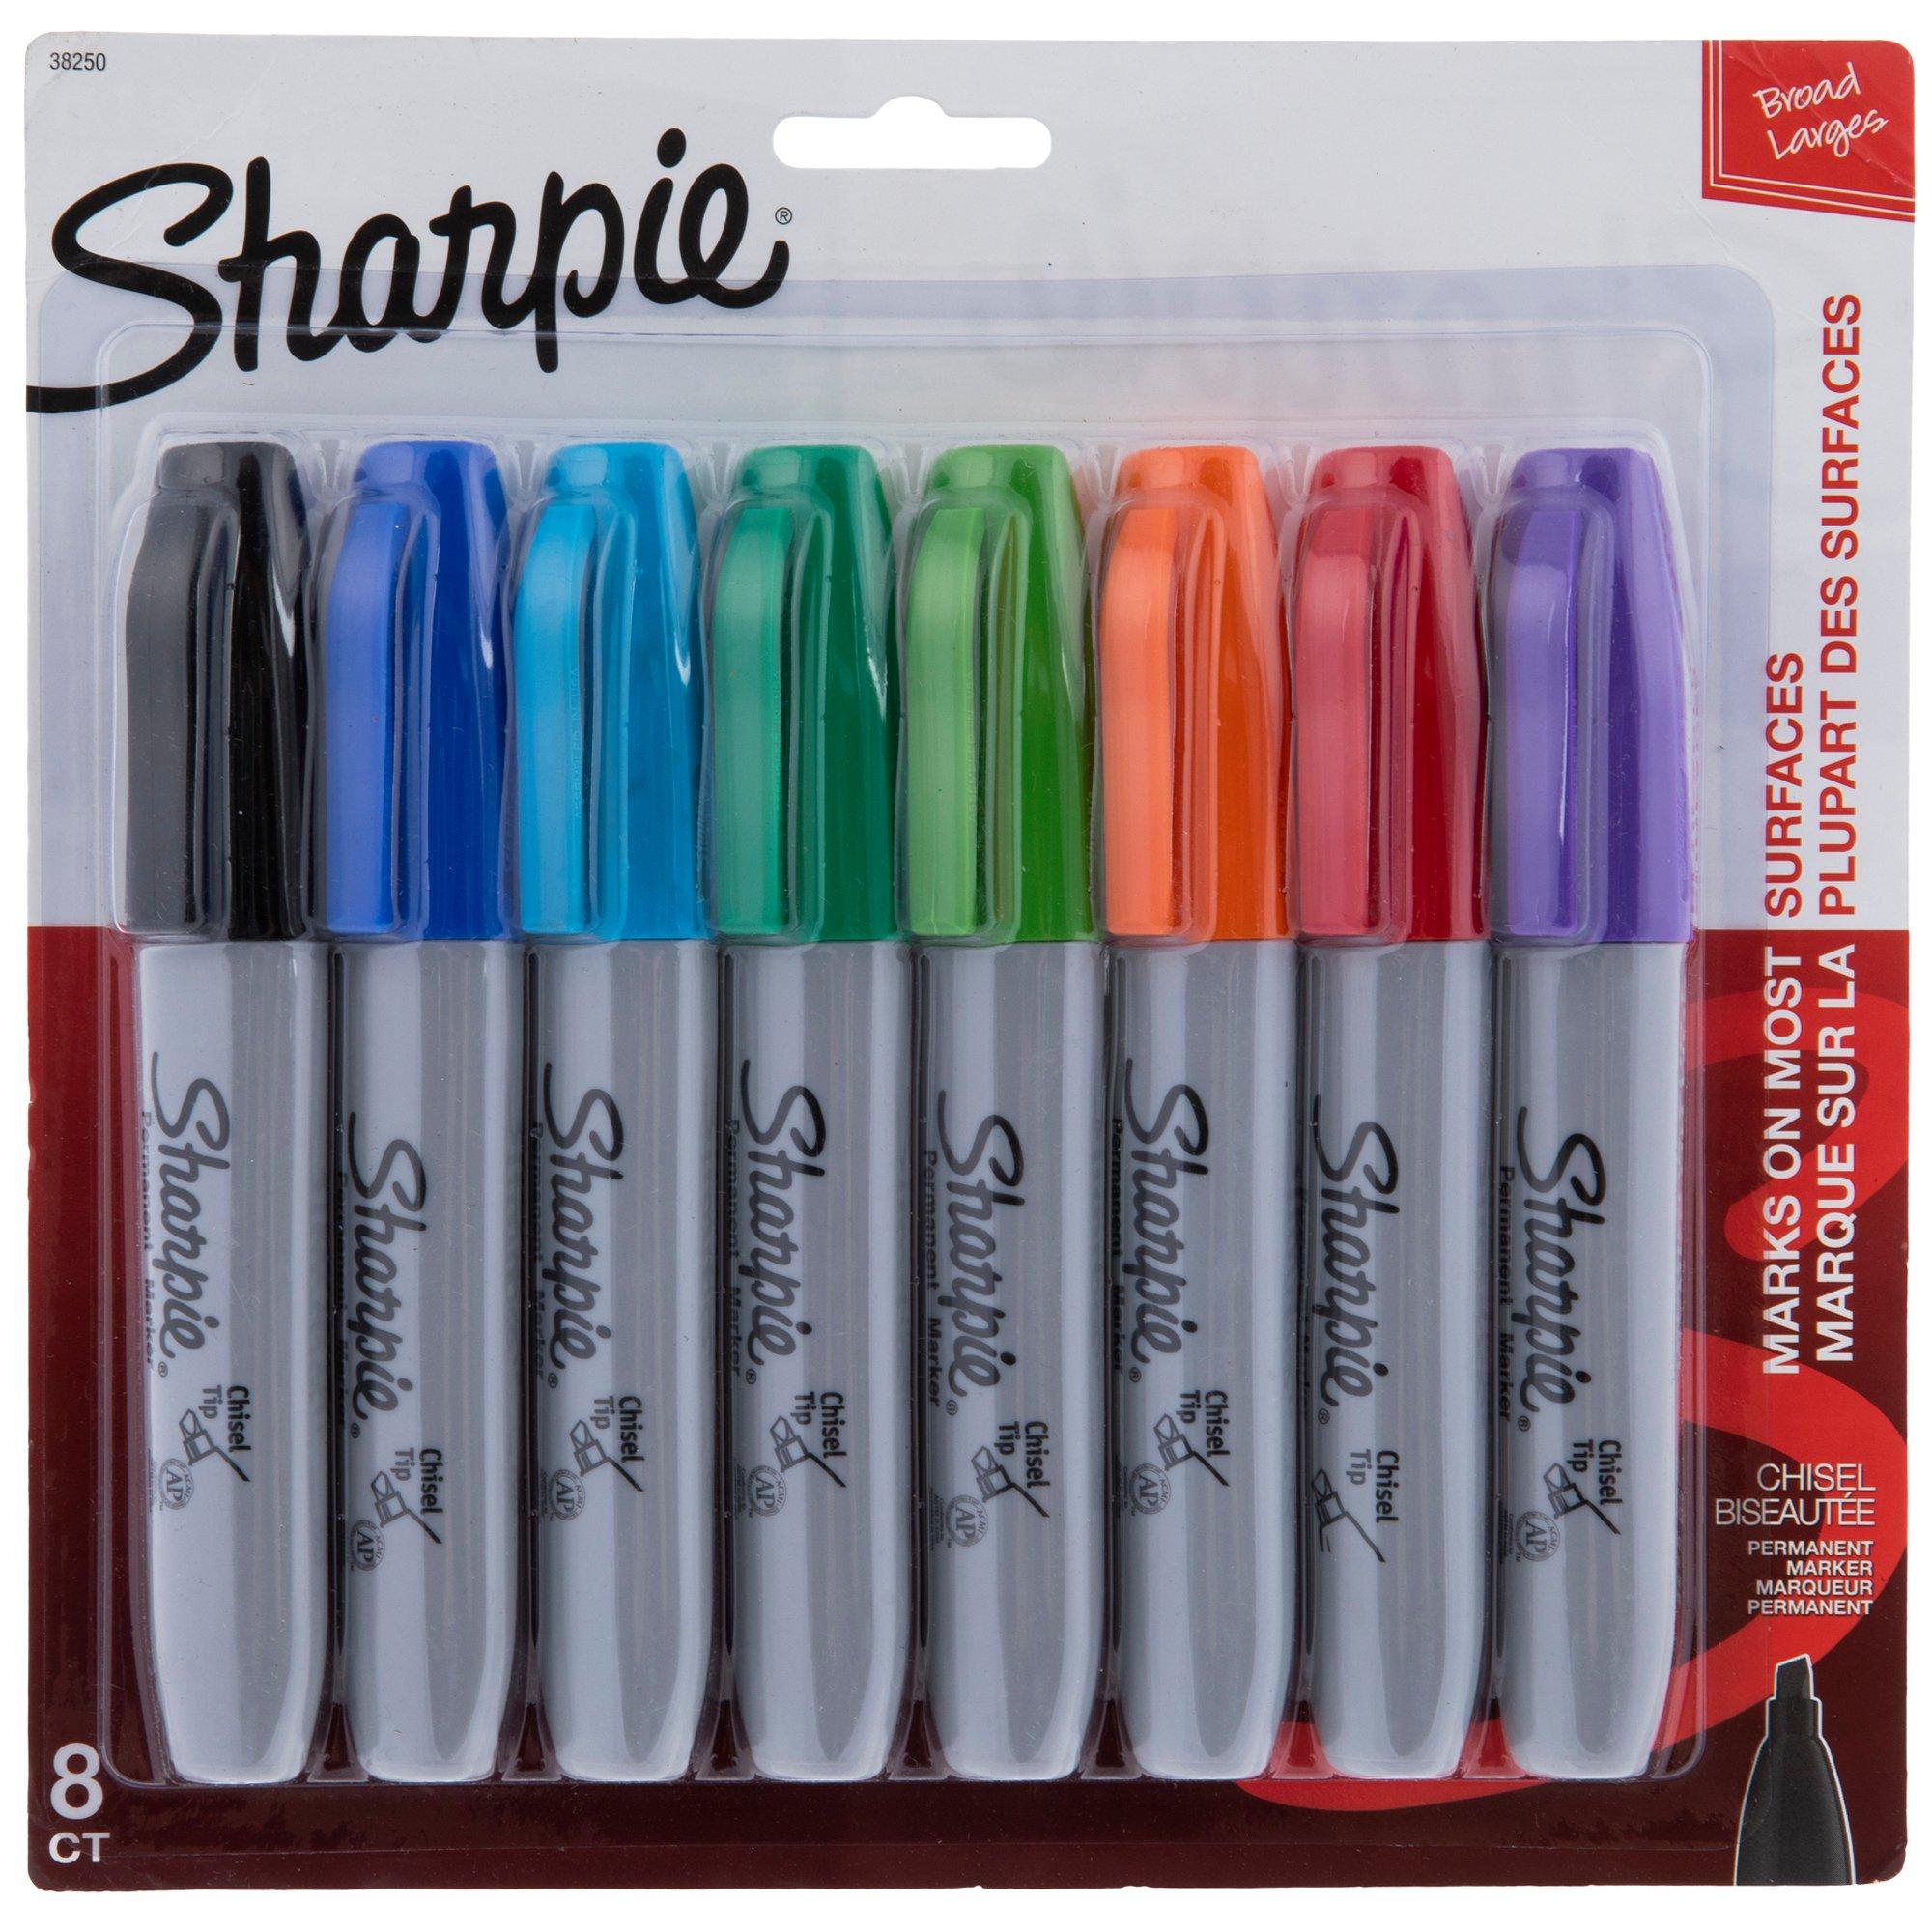  Sharpie Permanent Marker, Chisel Tip, Assorted Colors, Set of  8 : Office Products